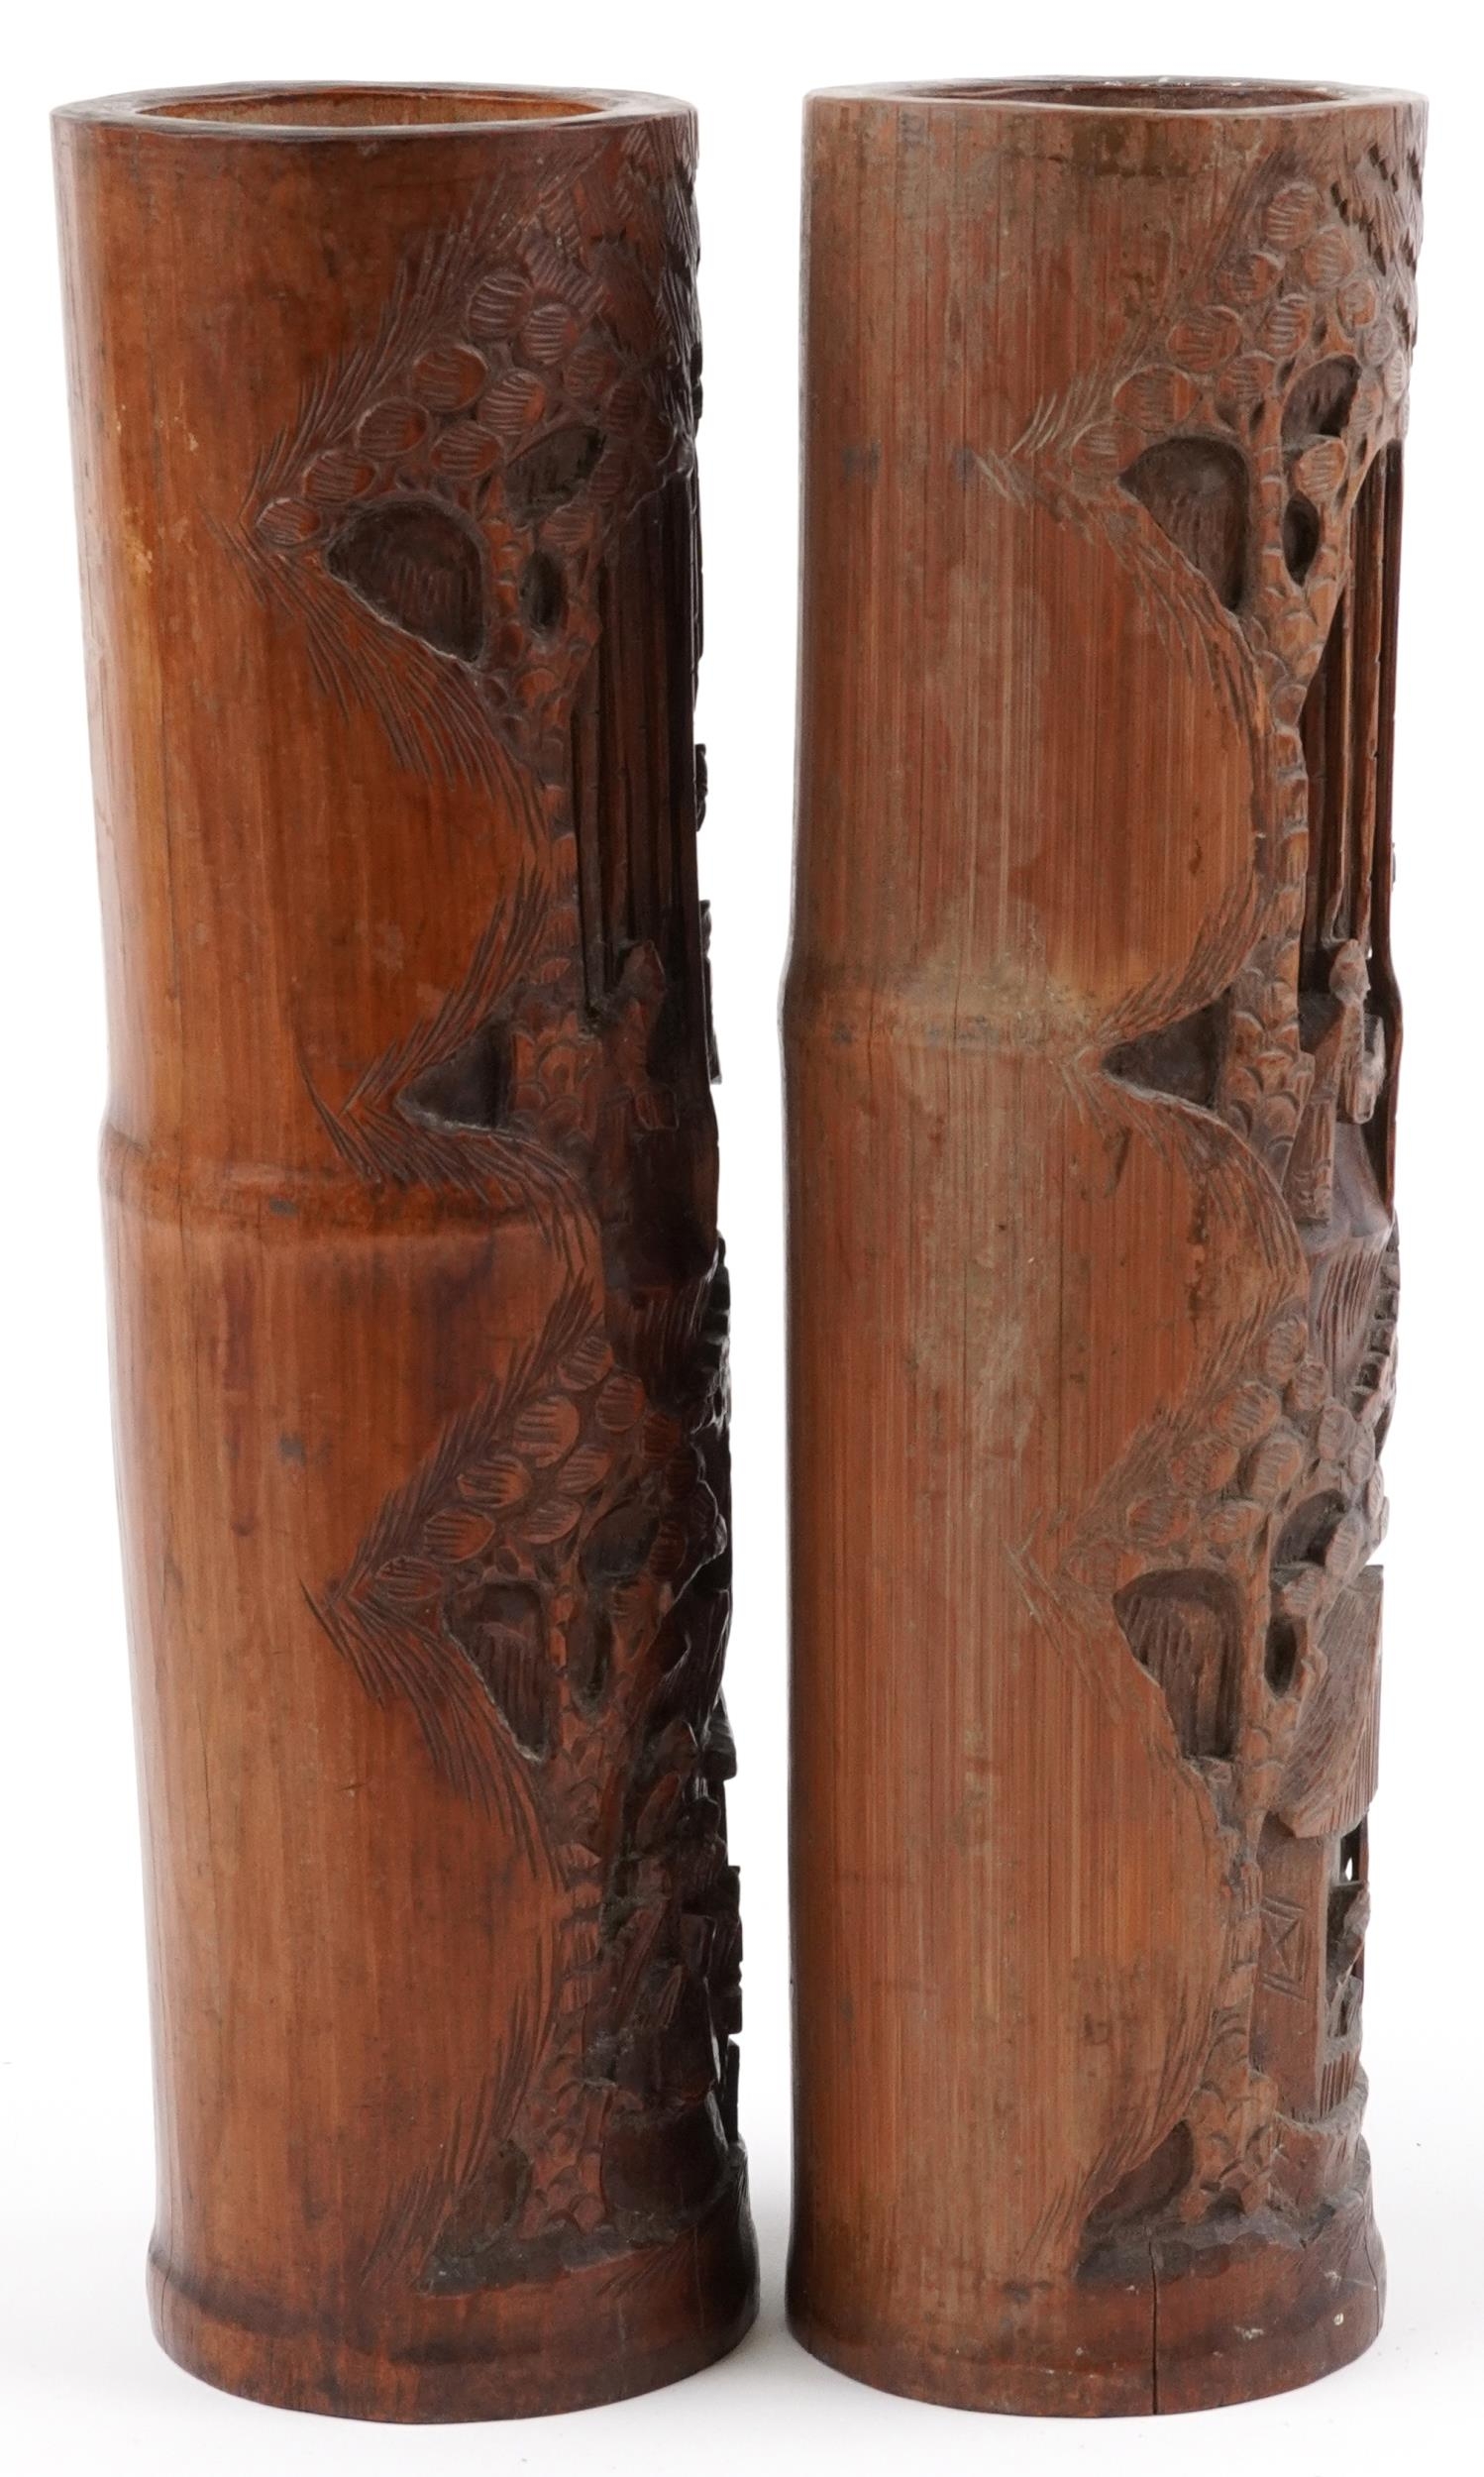 Pair of Chinese cylindrical bamboo vases carved with figures amongst trees and pavilions, each - Image 4 of 7